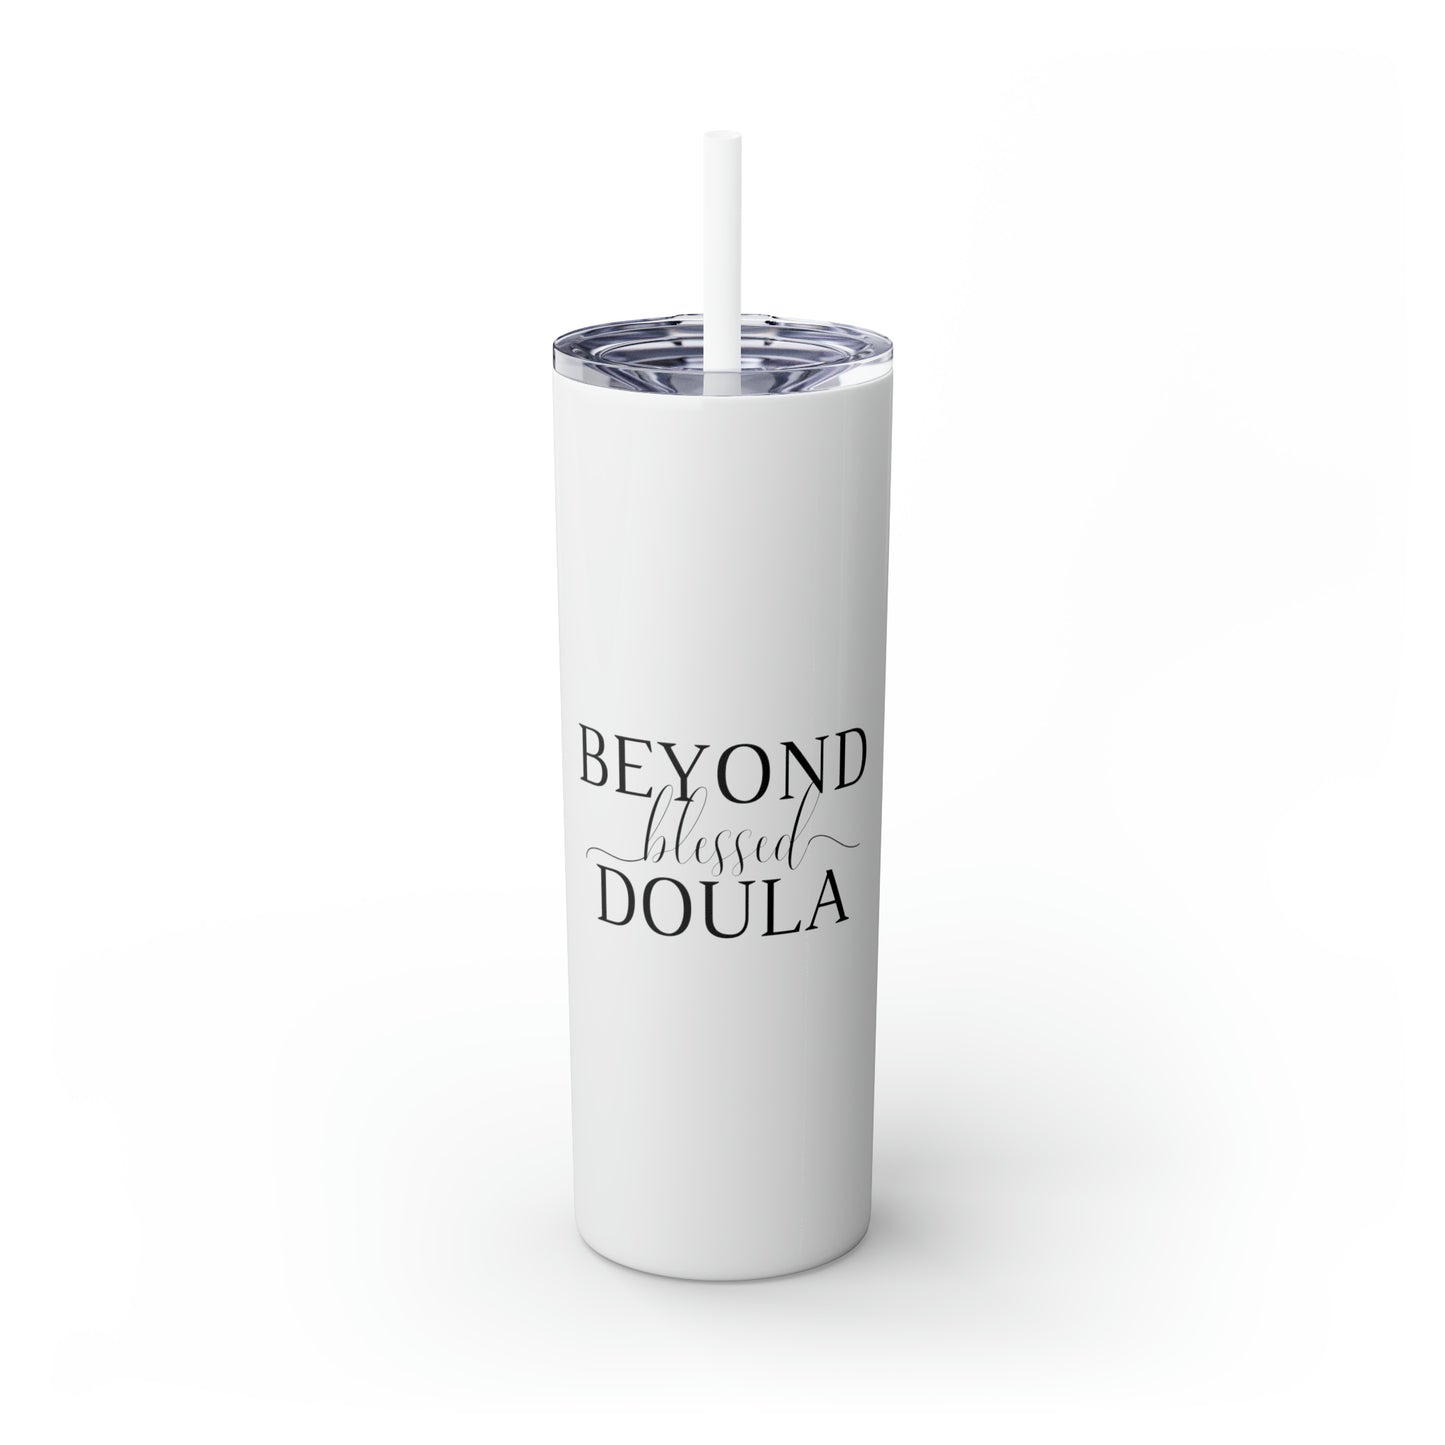 Beyond Blessed Doula - Plain Skinny Tumbler with Straw, 20oz